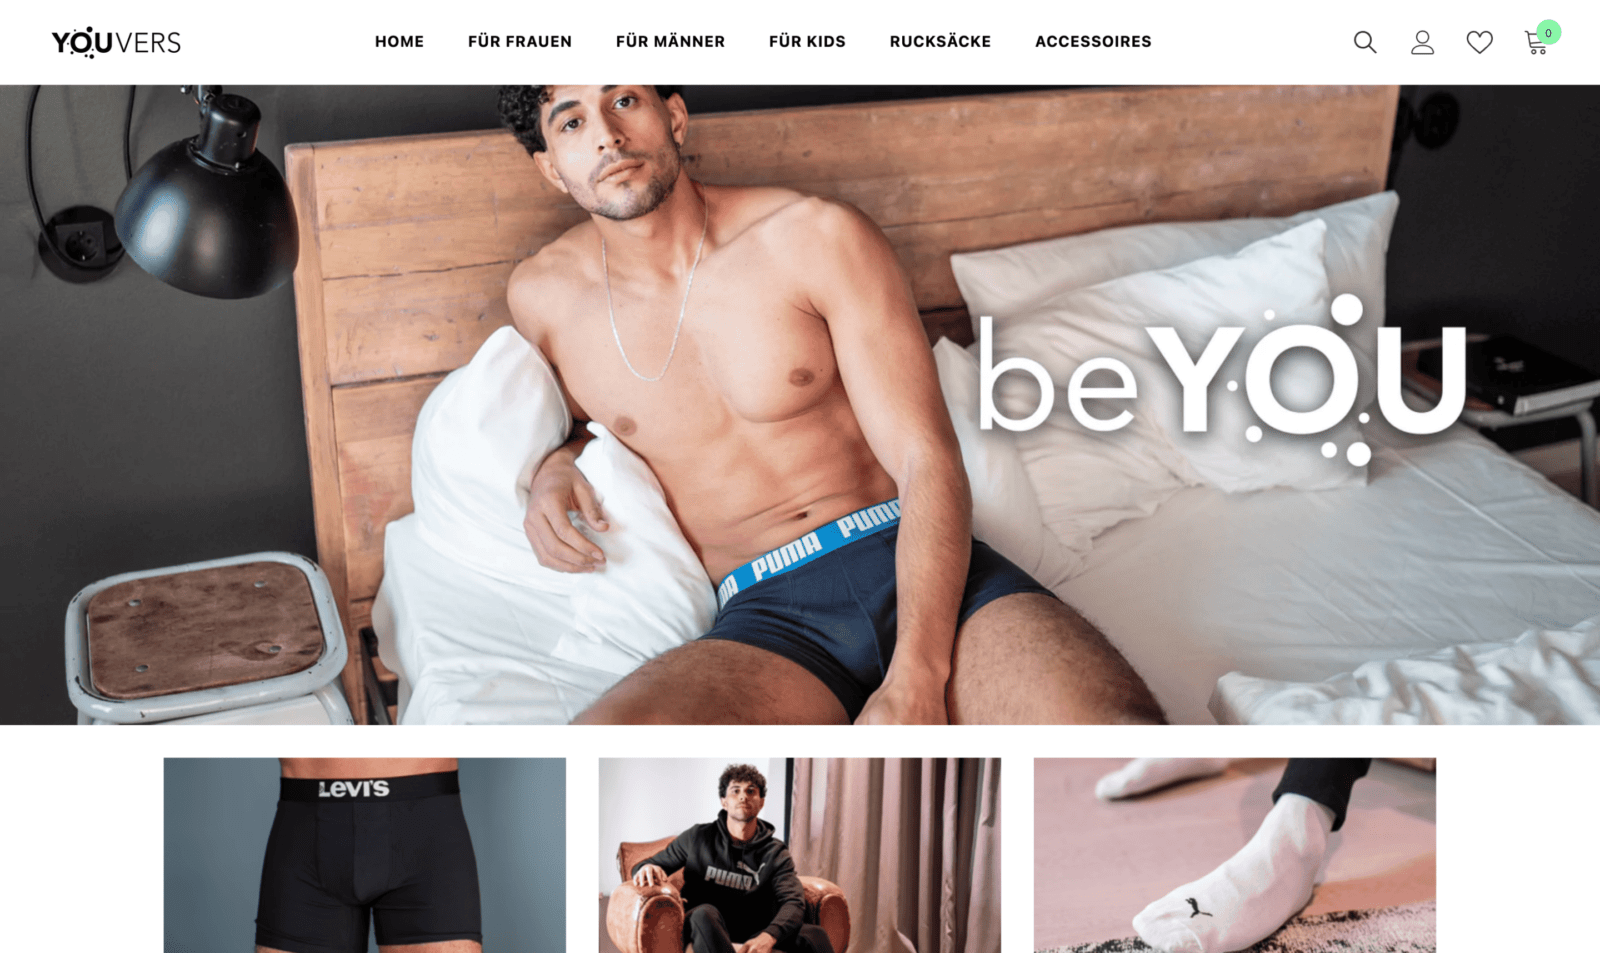 YOUVERS shopify Onlineshop by Michael Gahn DESIGN